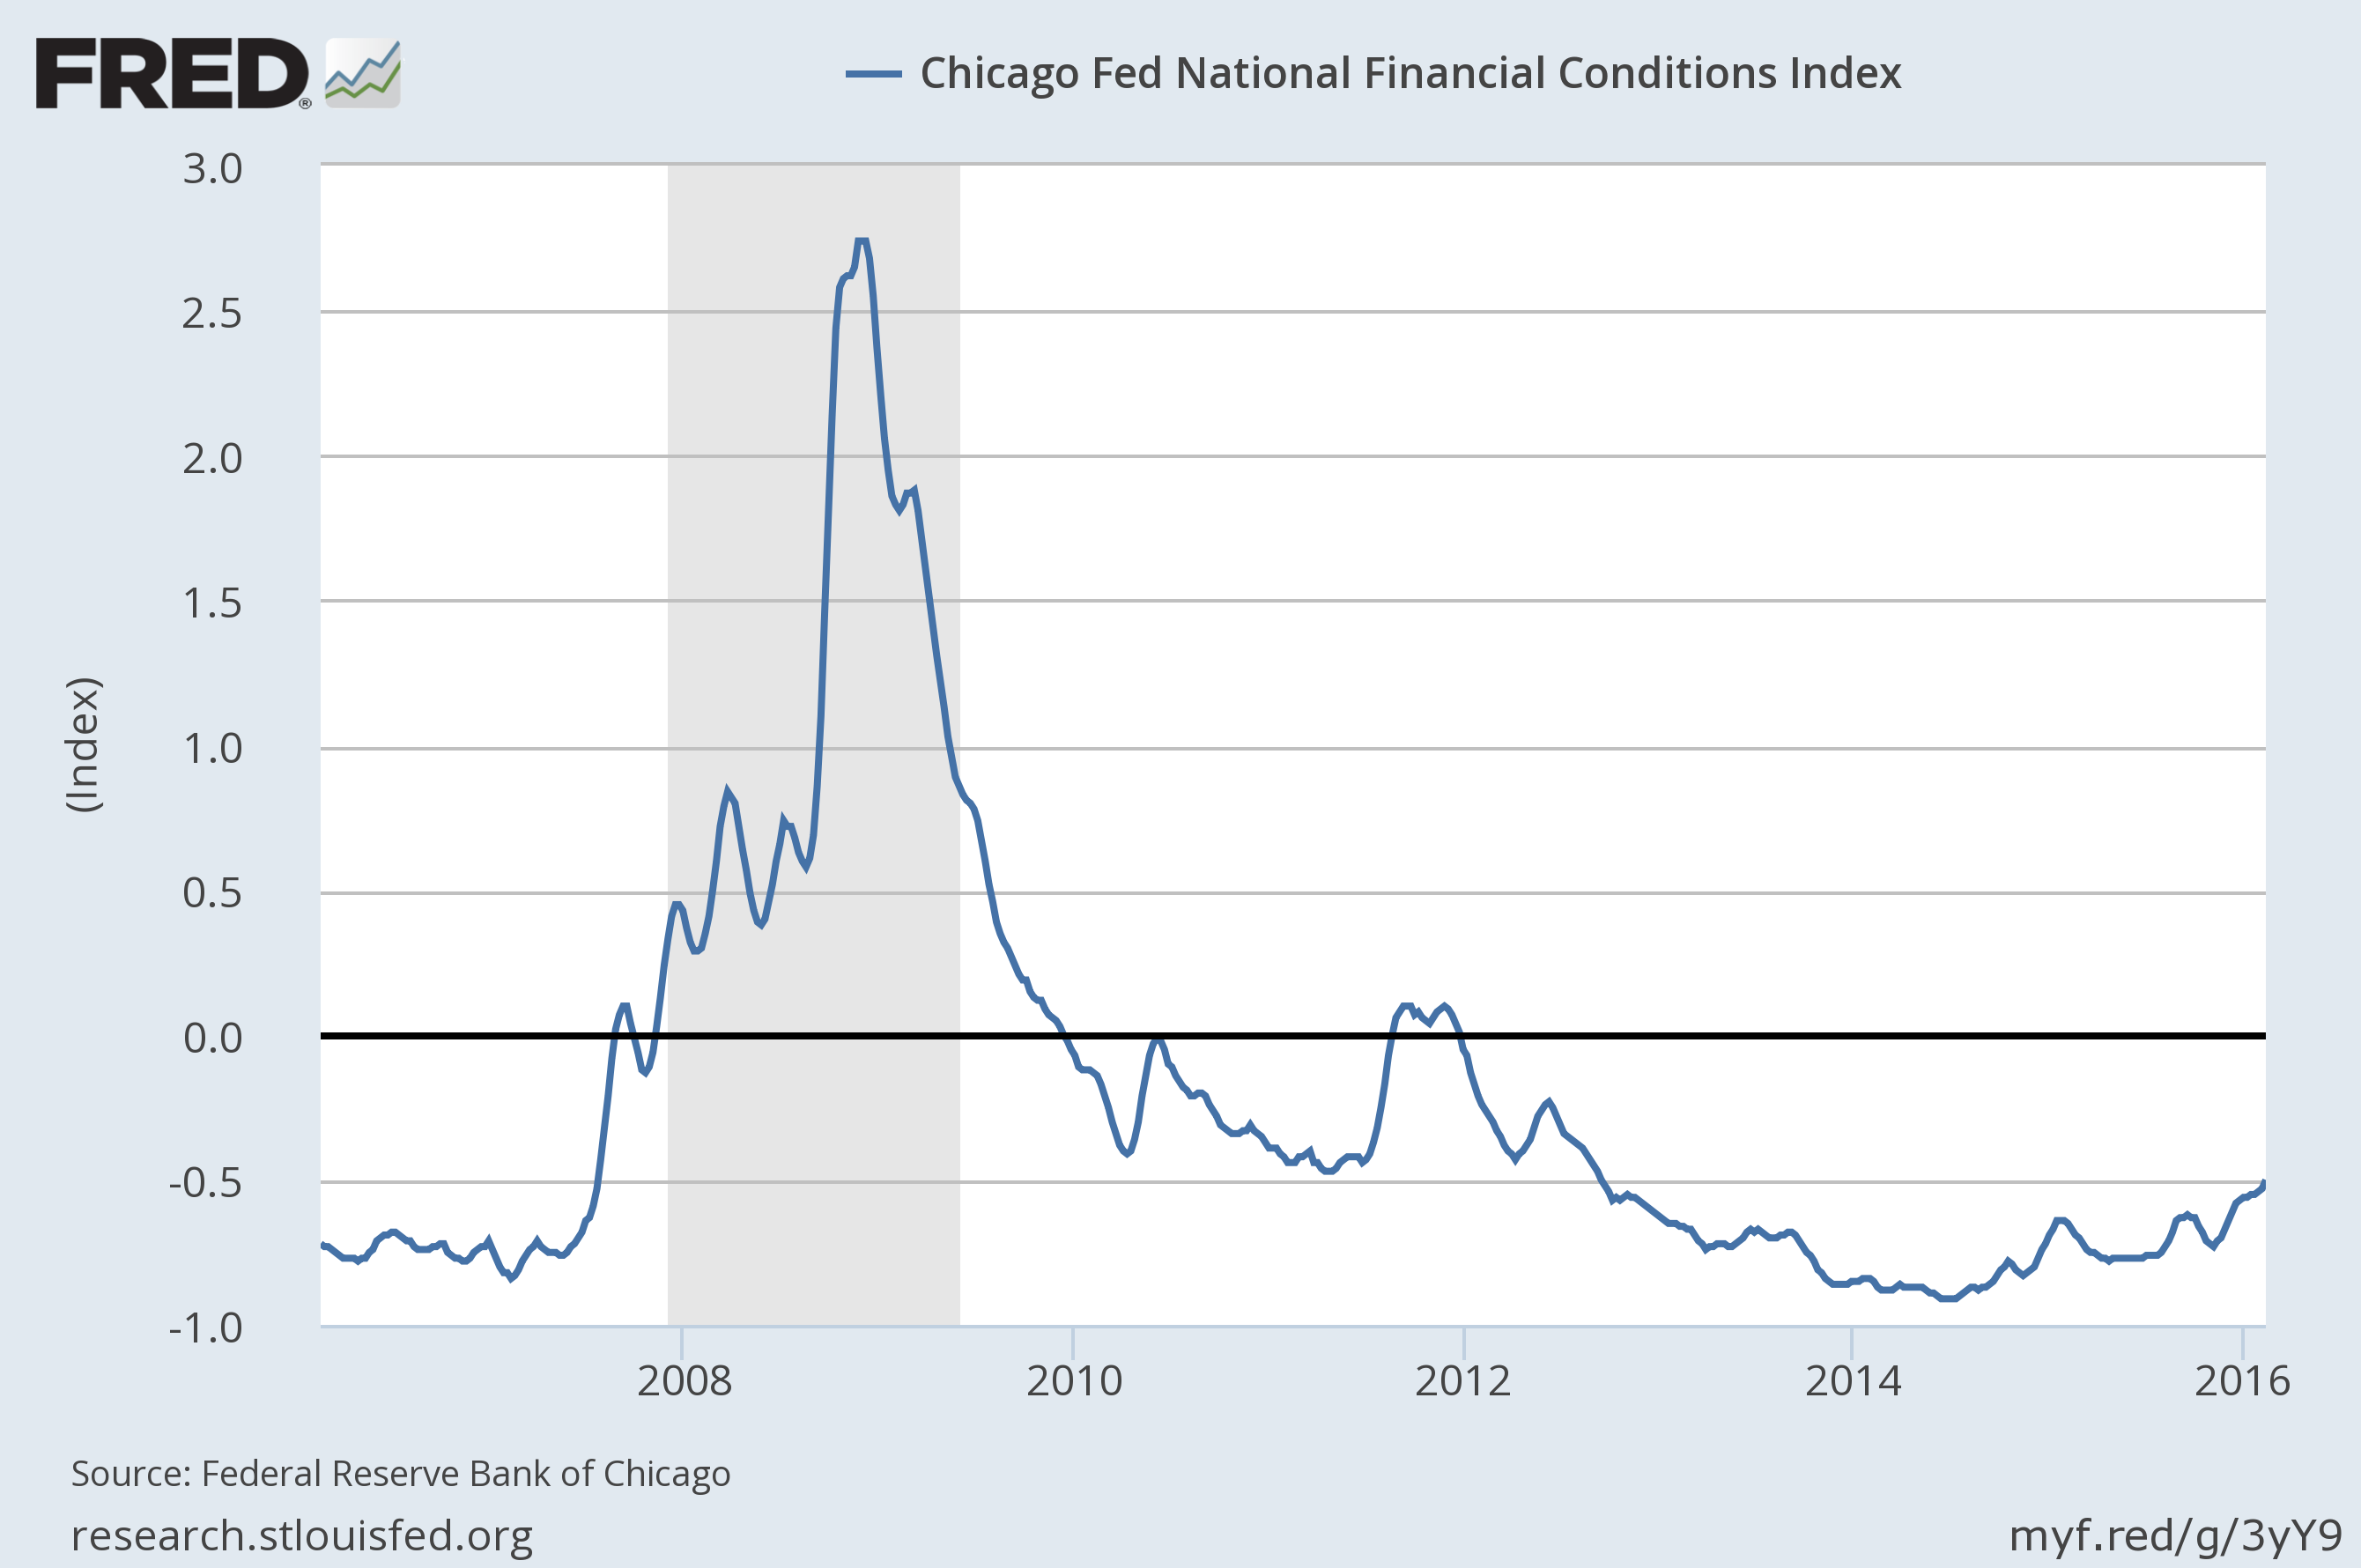 Chicago Fed Nationla Financial Conditions Index 2006-2016